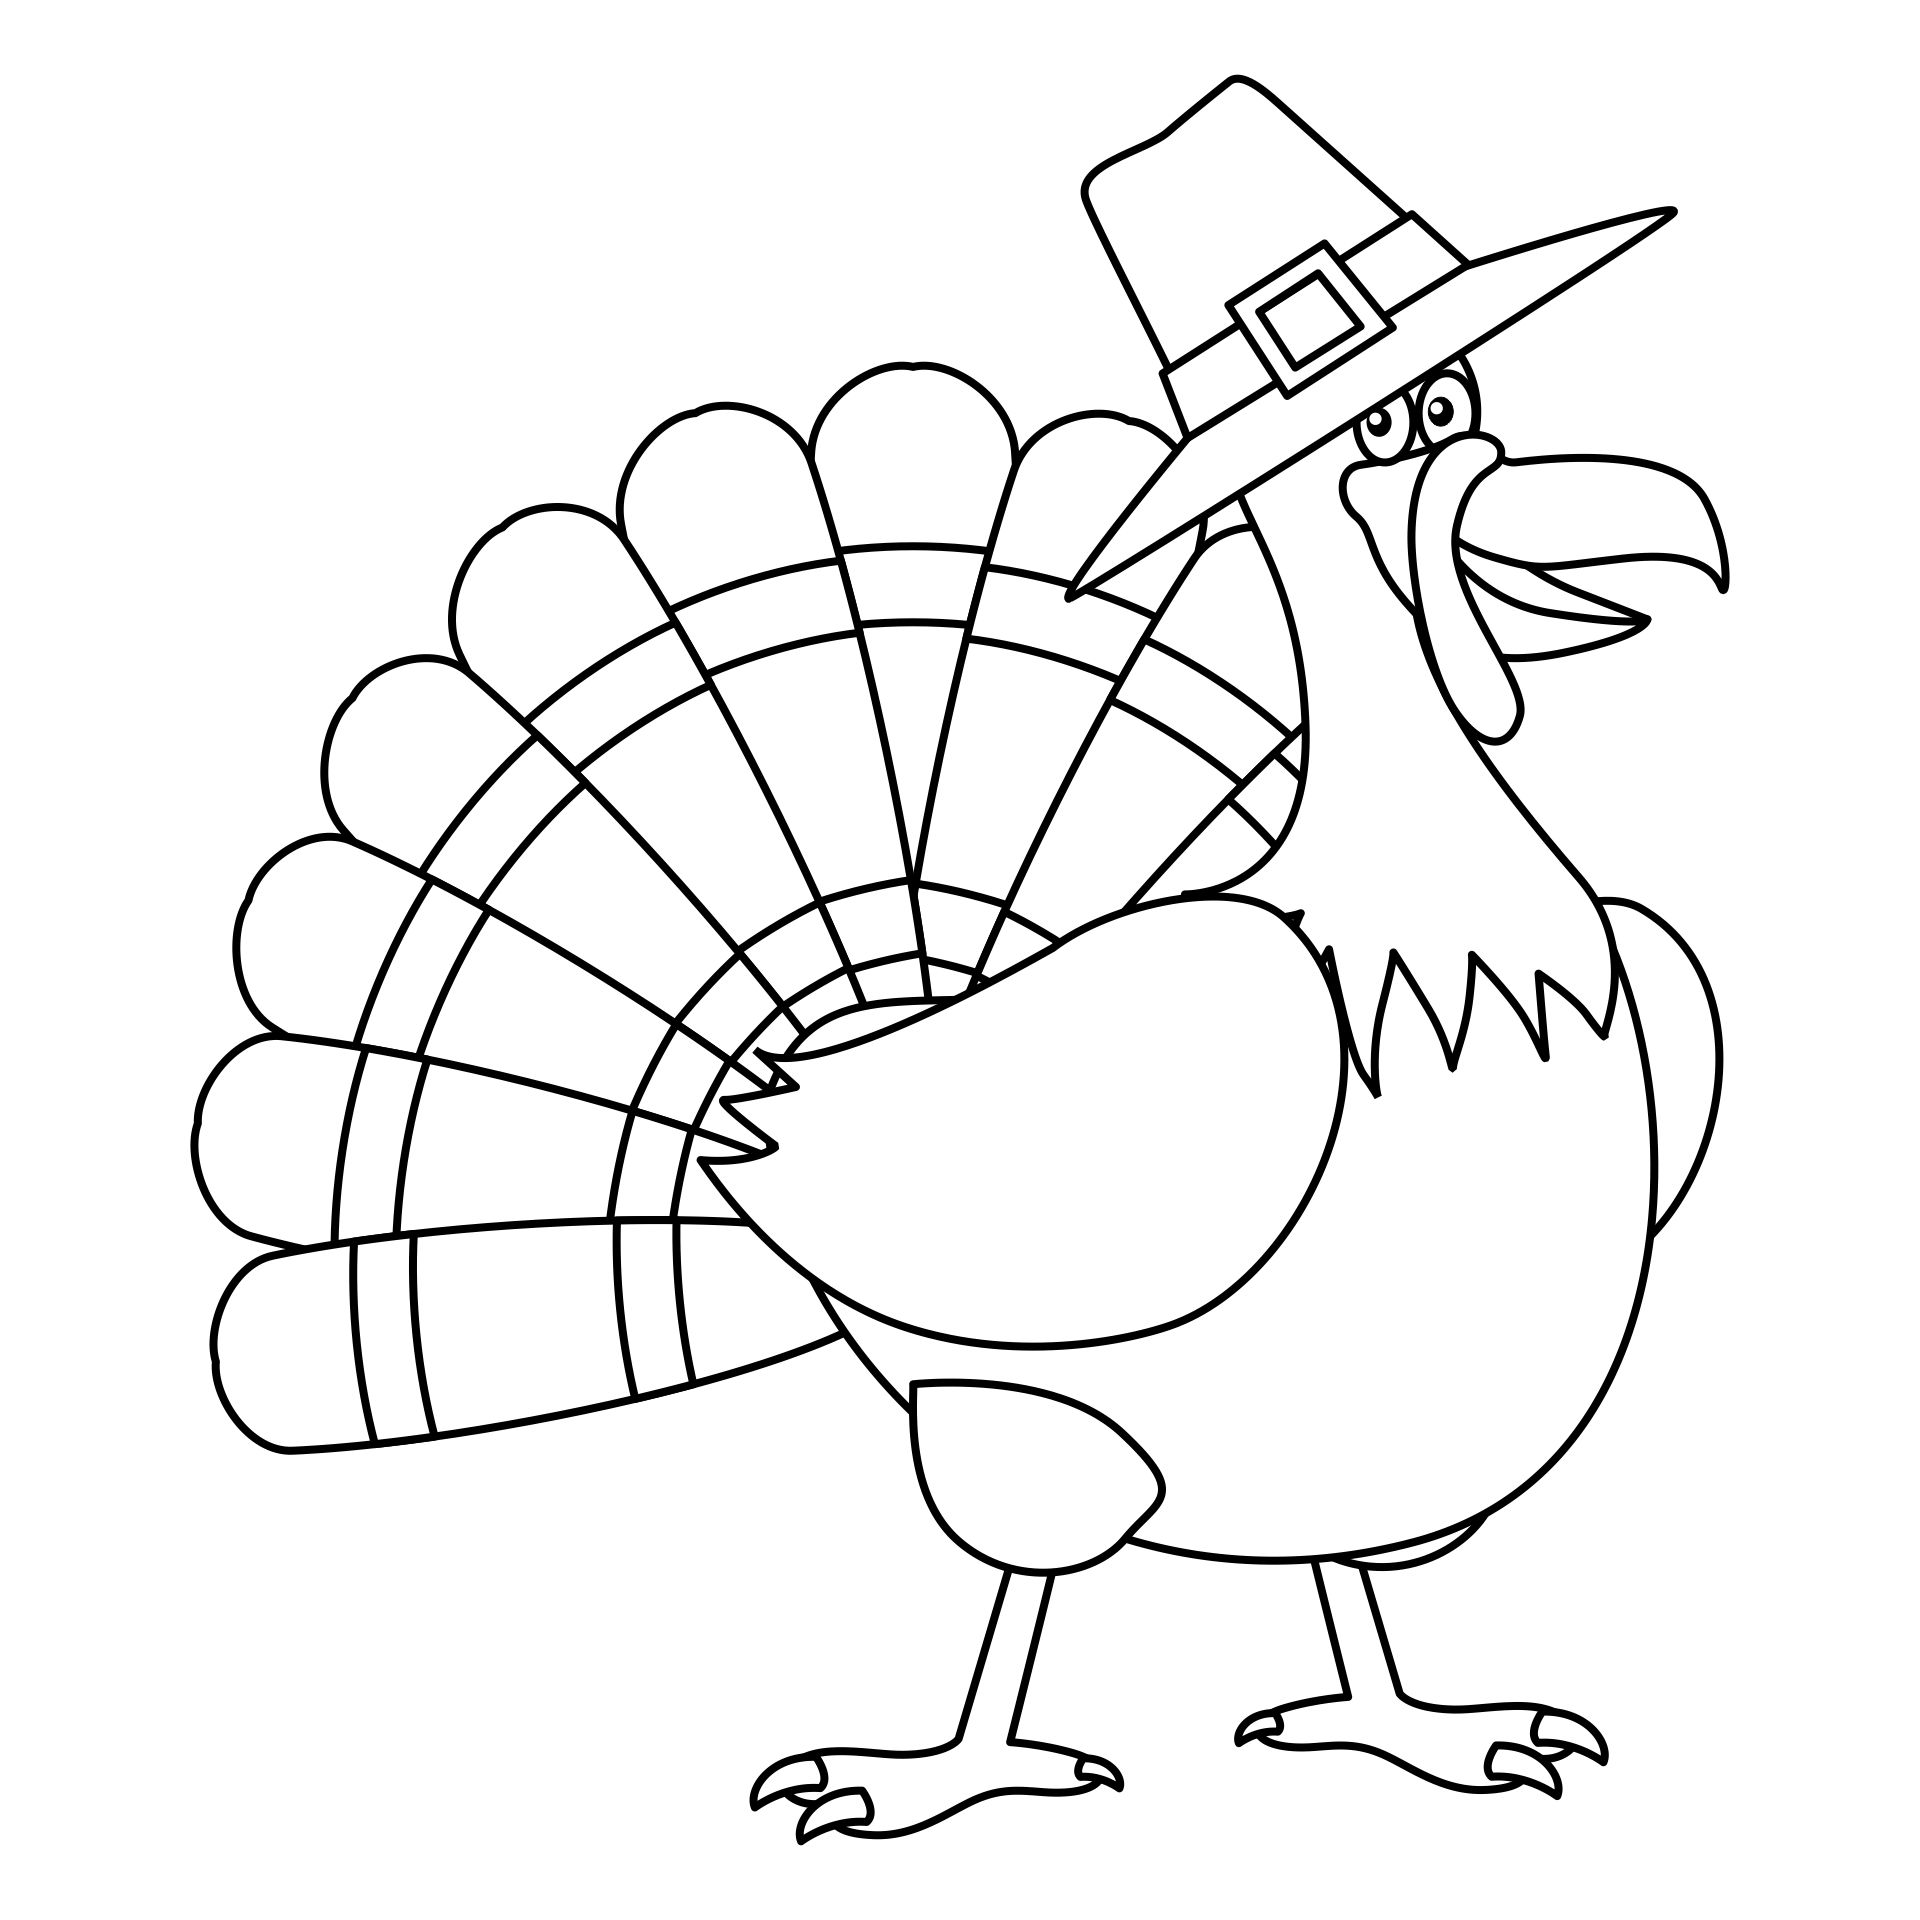 Printable Thanksgiving Turkey Coloring Page For Kids